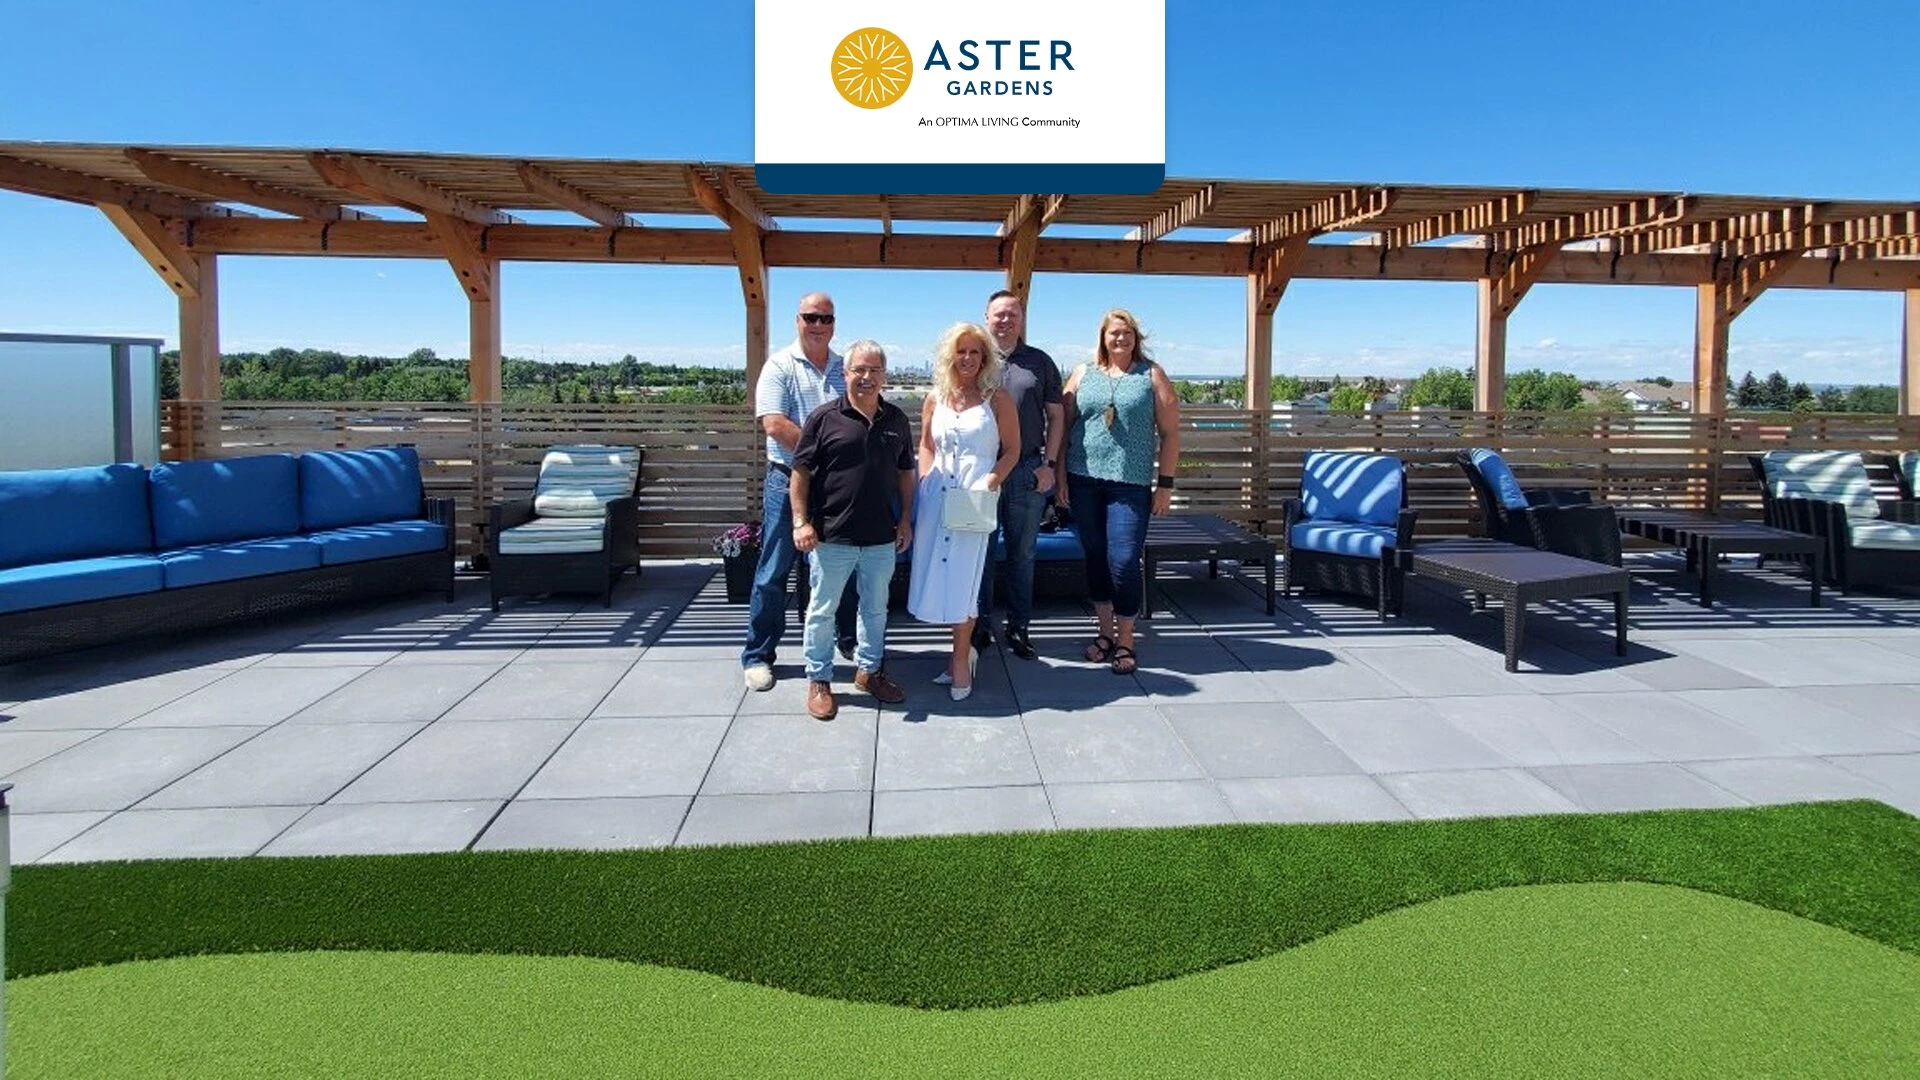 Aster gardens community picture